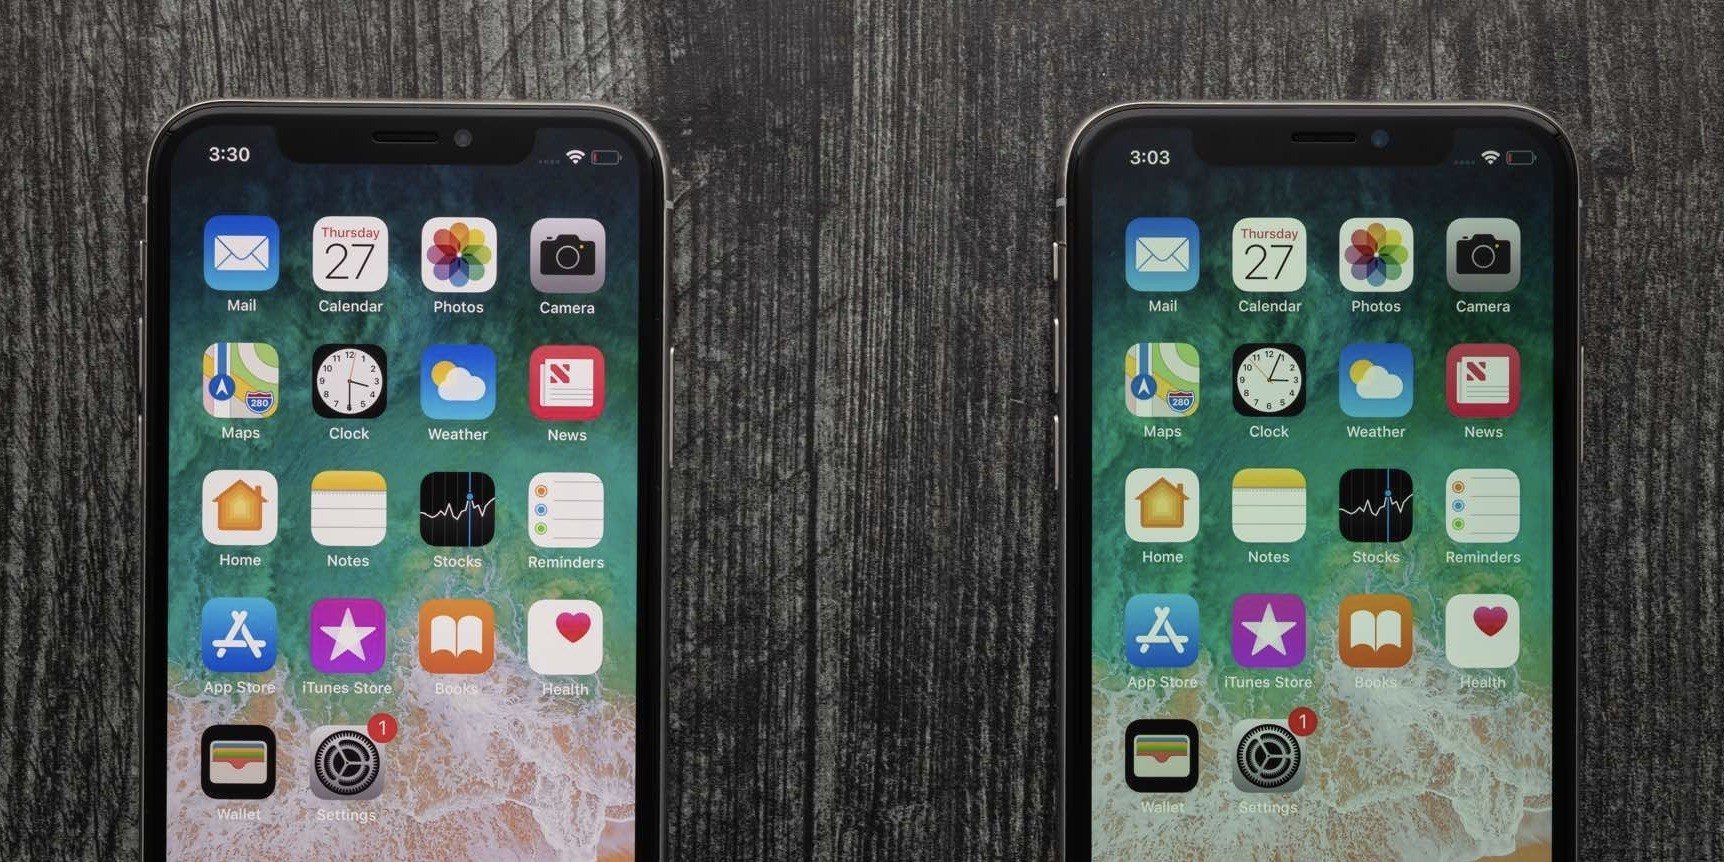 iPhone X Screen Cracked? Turns out you Don’t Have to Pay OLED Prices to Replace the Display